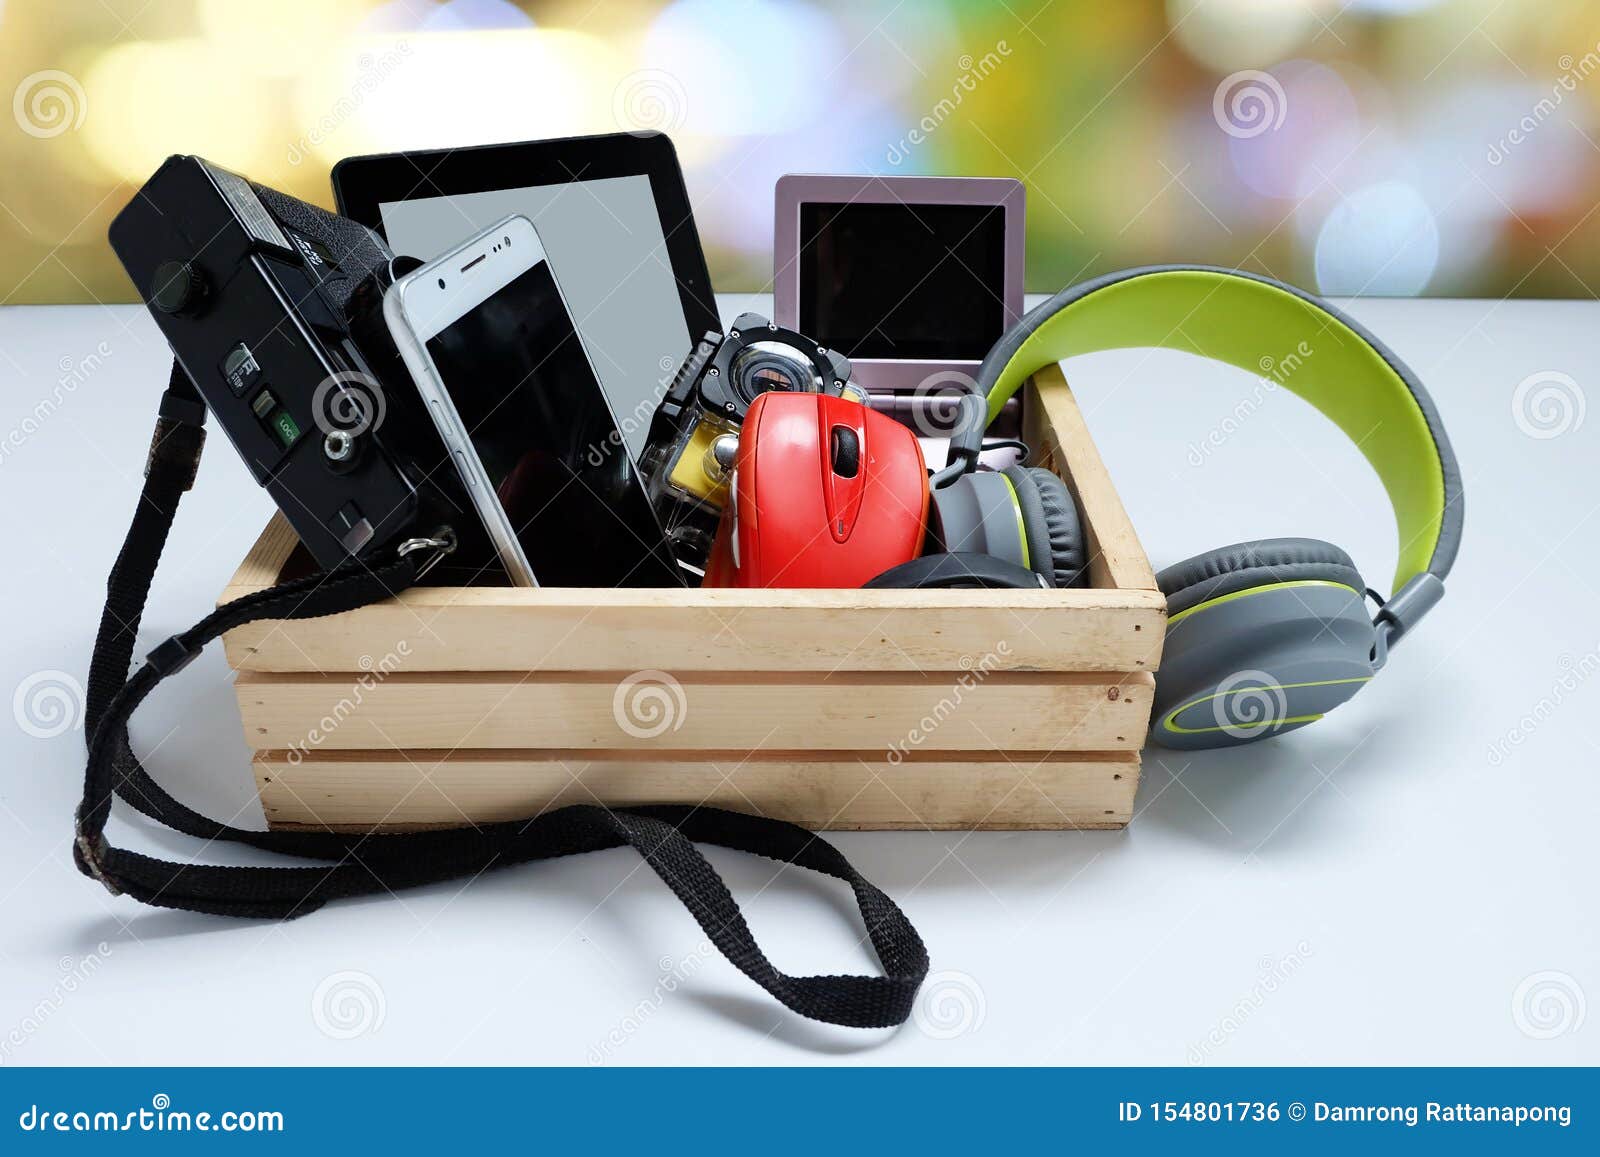 many used modern electronic gadgets for daily use in wooden cases on white background